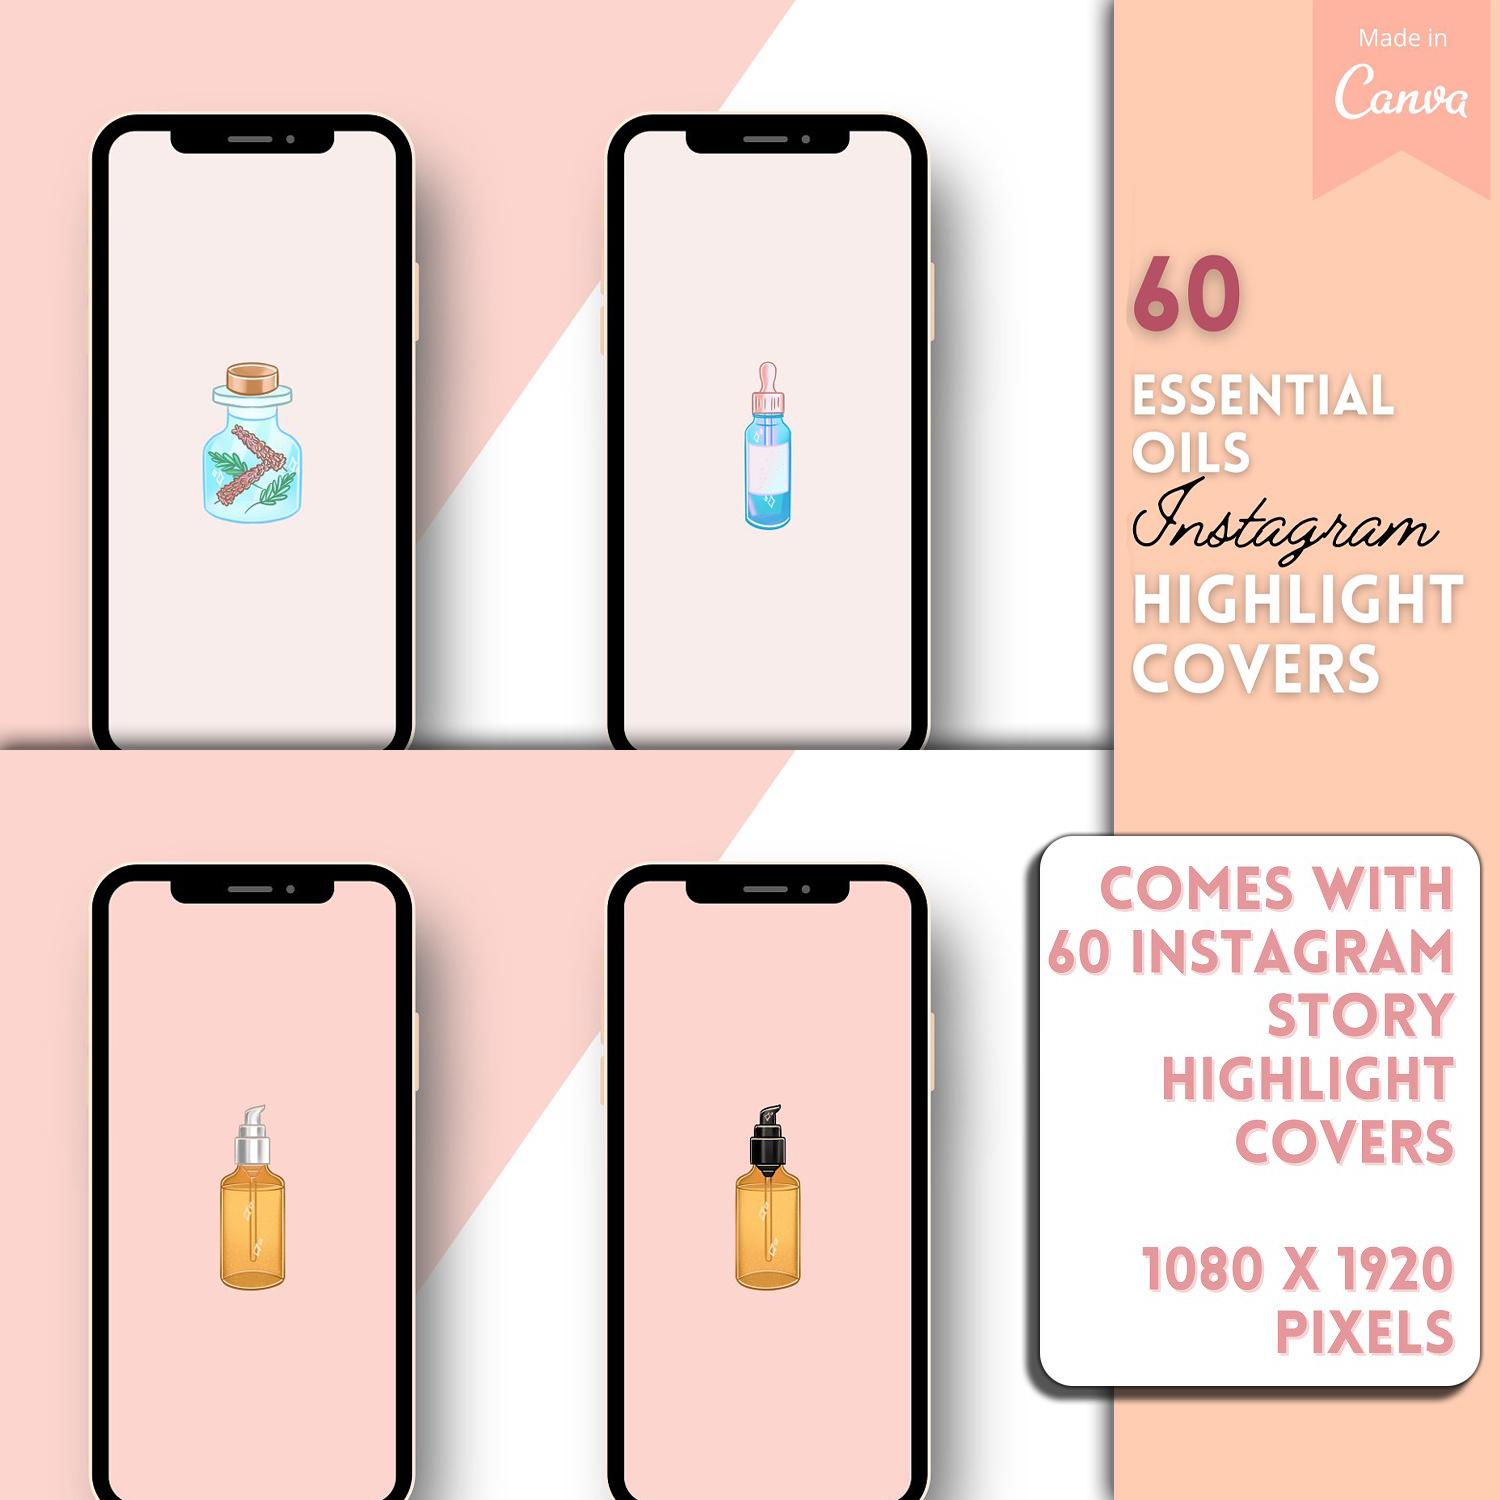 Prints of essential oils ig highlight covers.